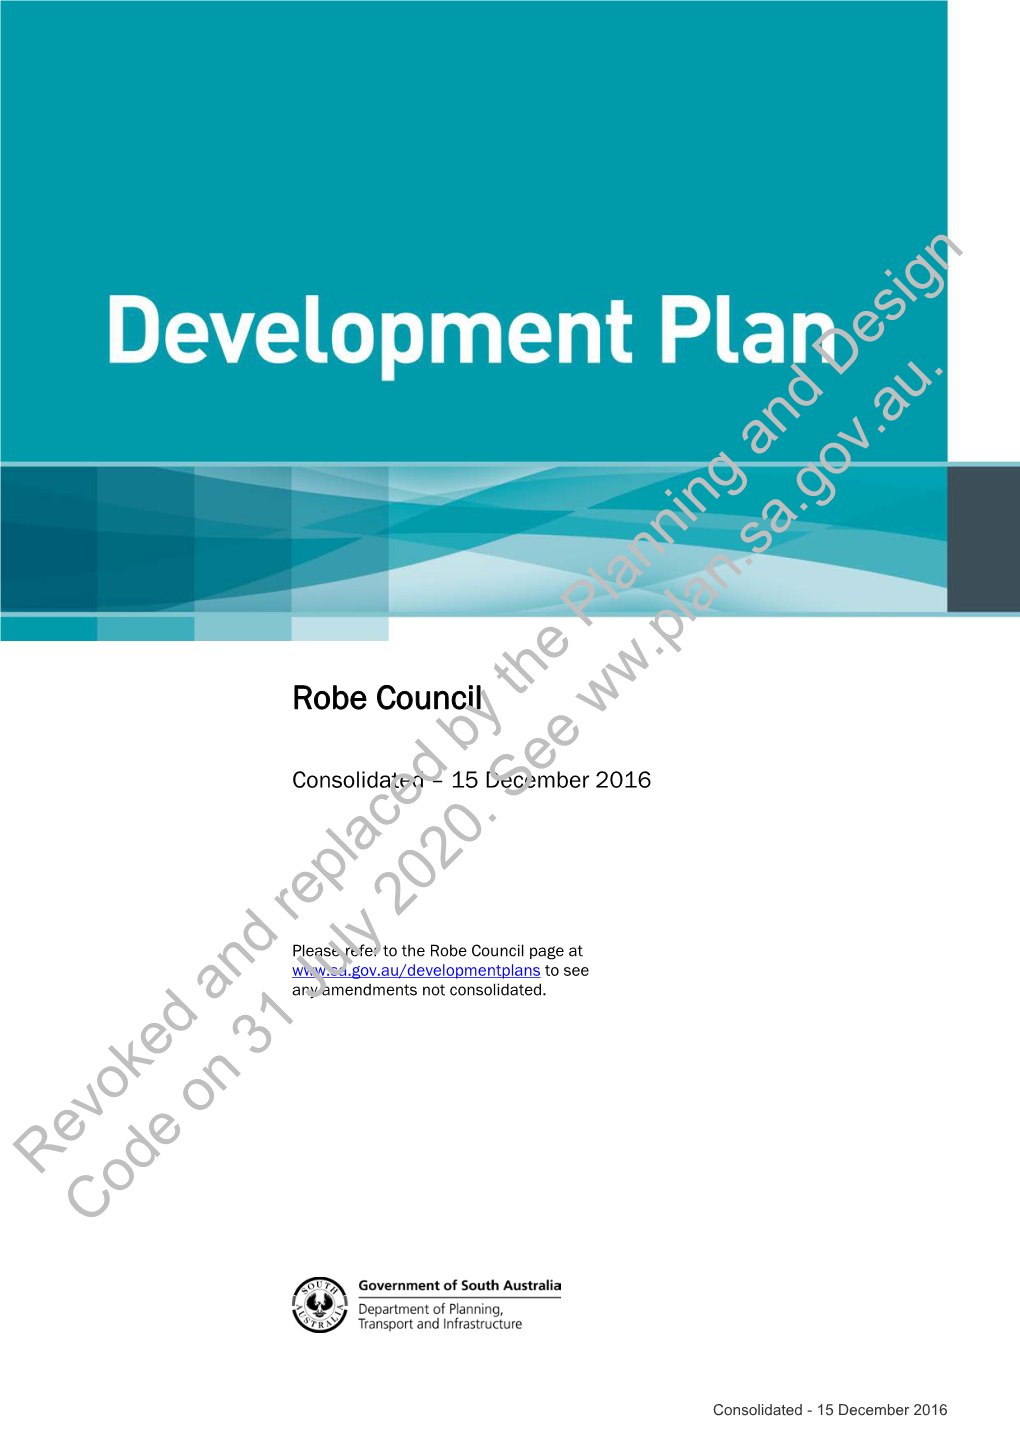 Robe Council Development Plan Since the Inception of the Electronic Development Plan on 24 April 1997